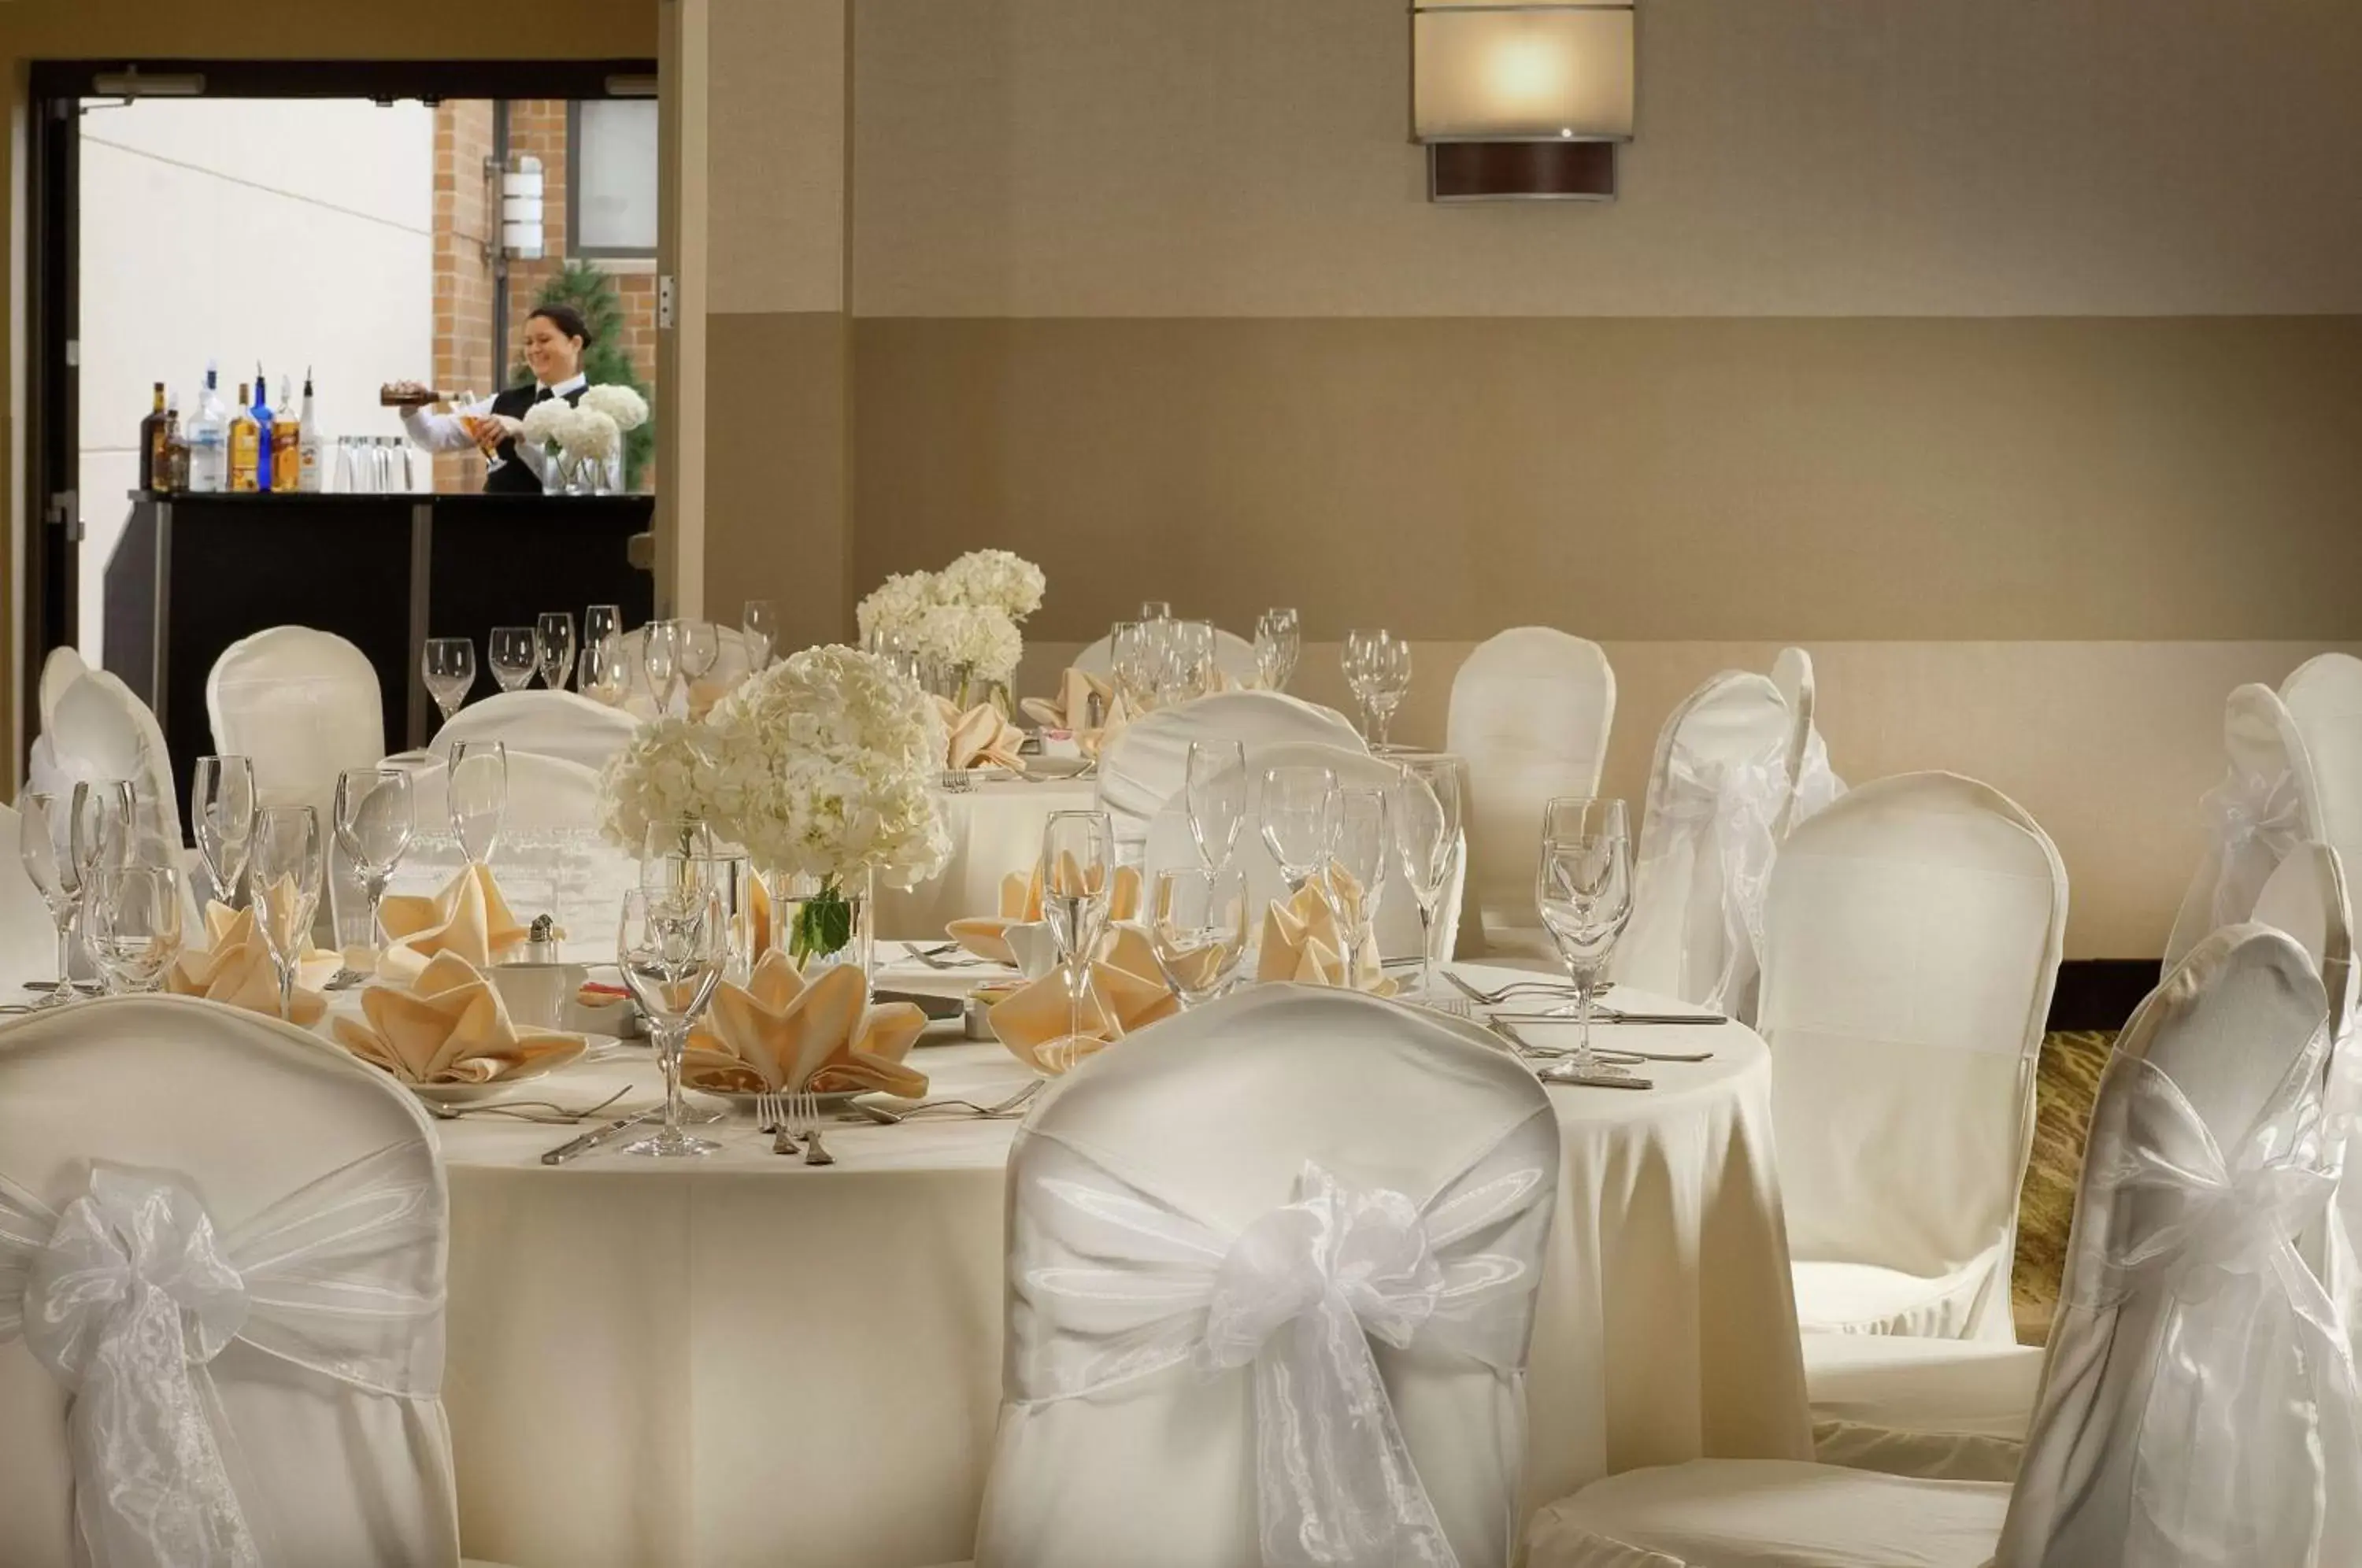 Meeting/conference room, Banquet Facilities in DoubleTree by Hilton Dulles Airport-Sterling